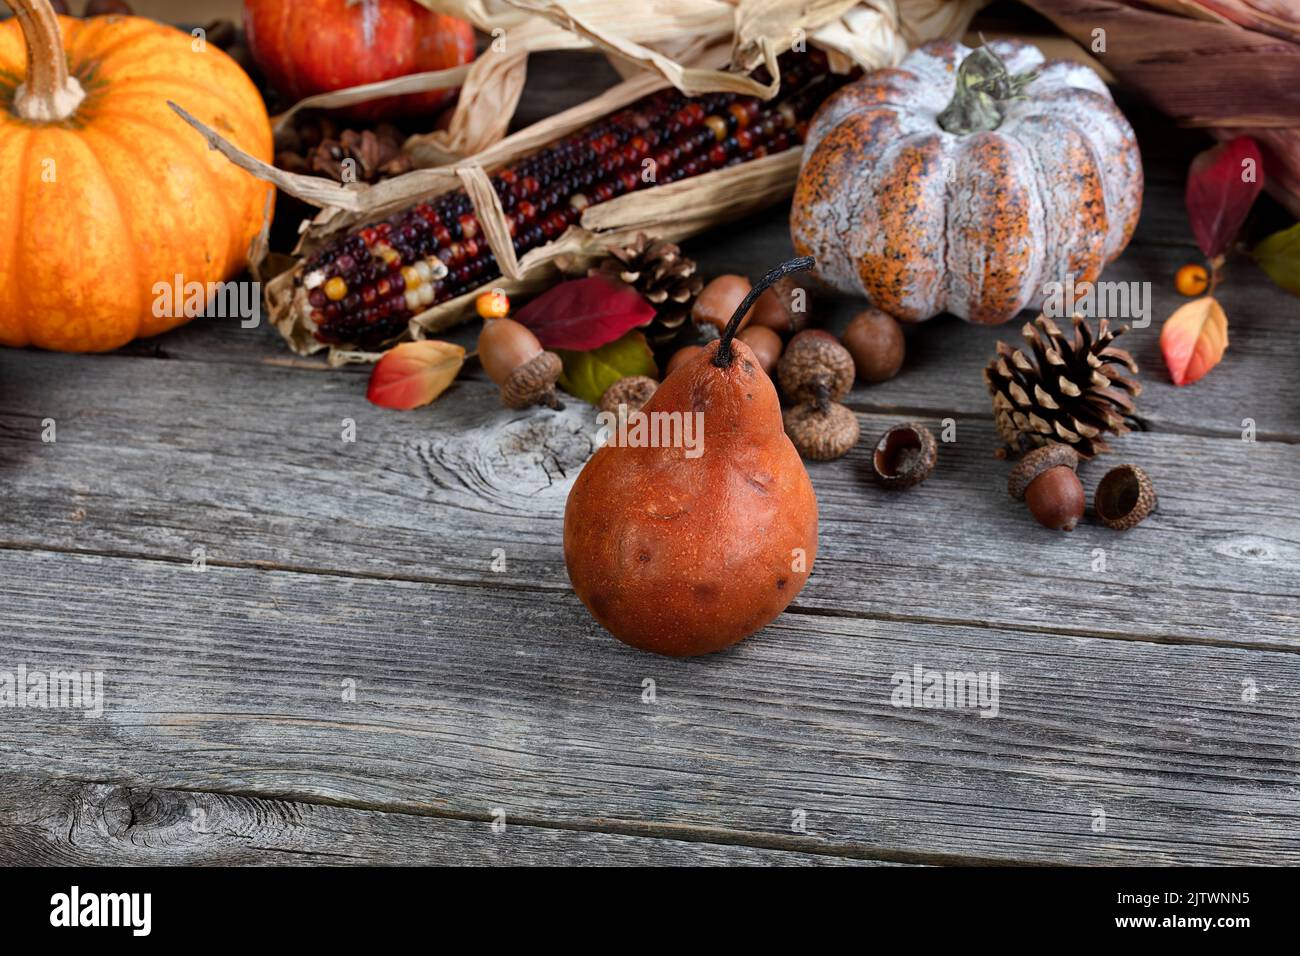 Close up a ripe pear fruit with autumn harvest background of gourds, corn, acorns on rustic wood table Stock Photo